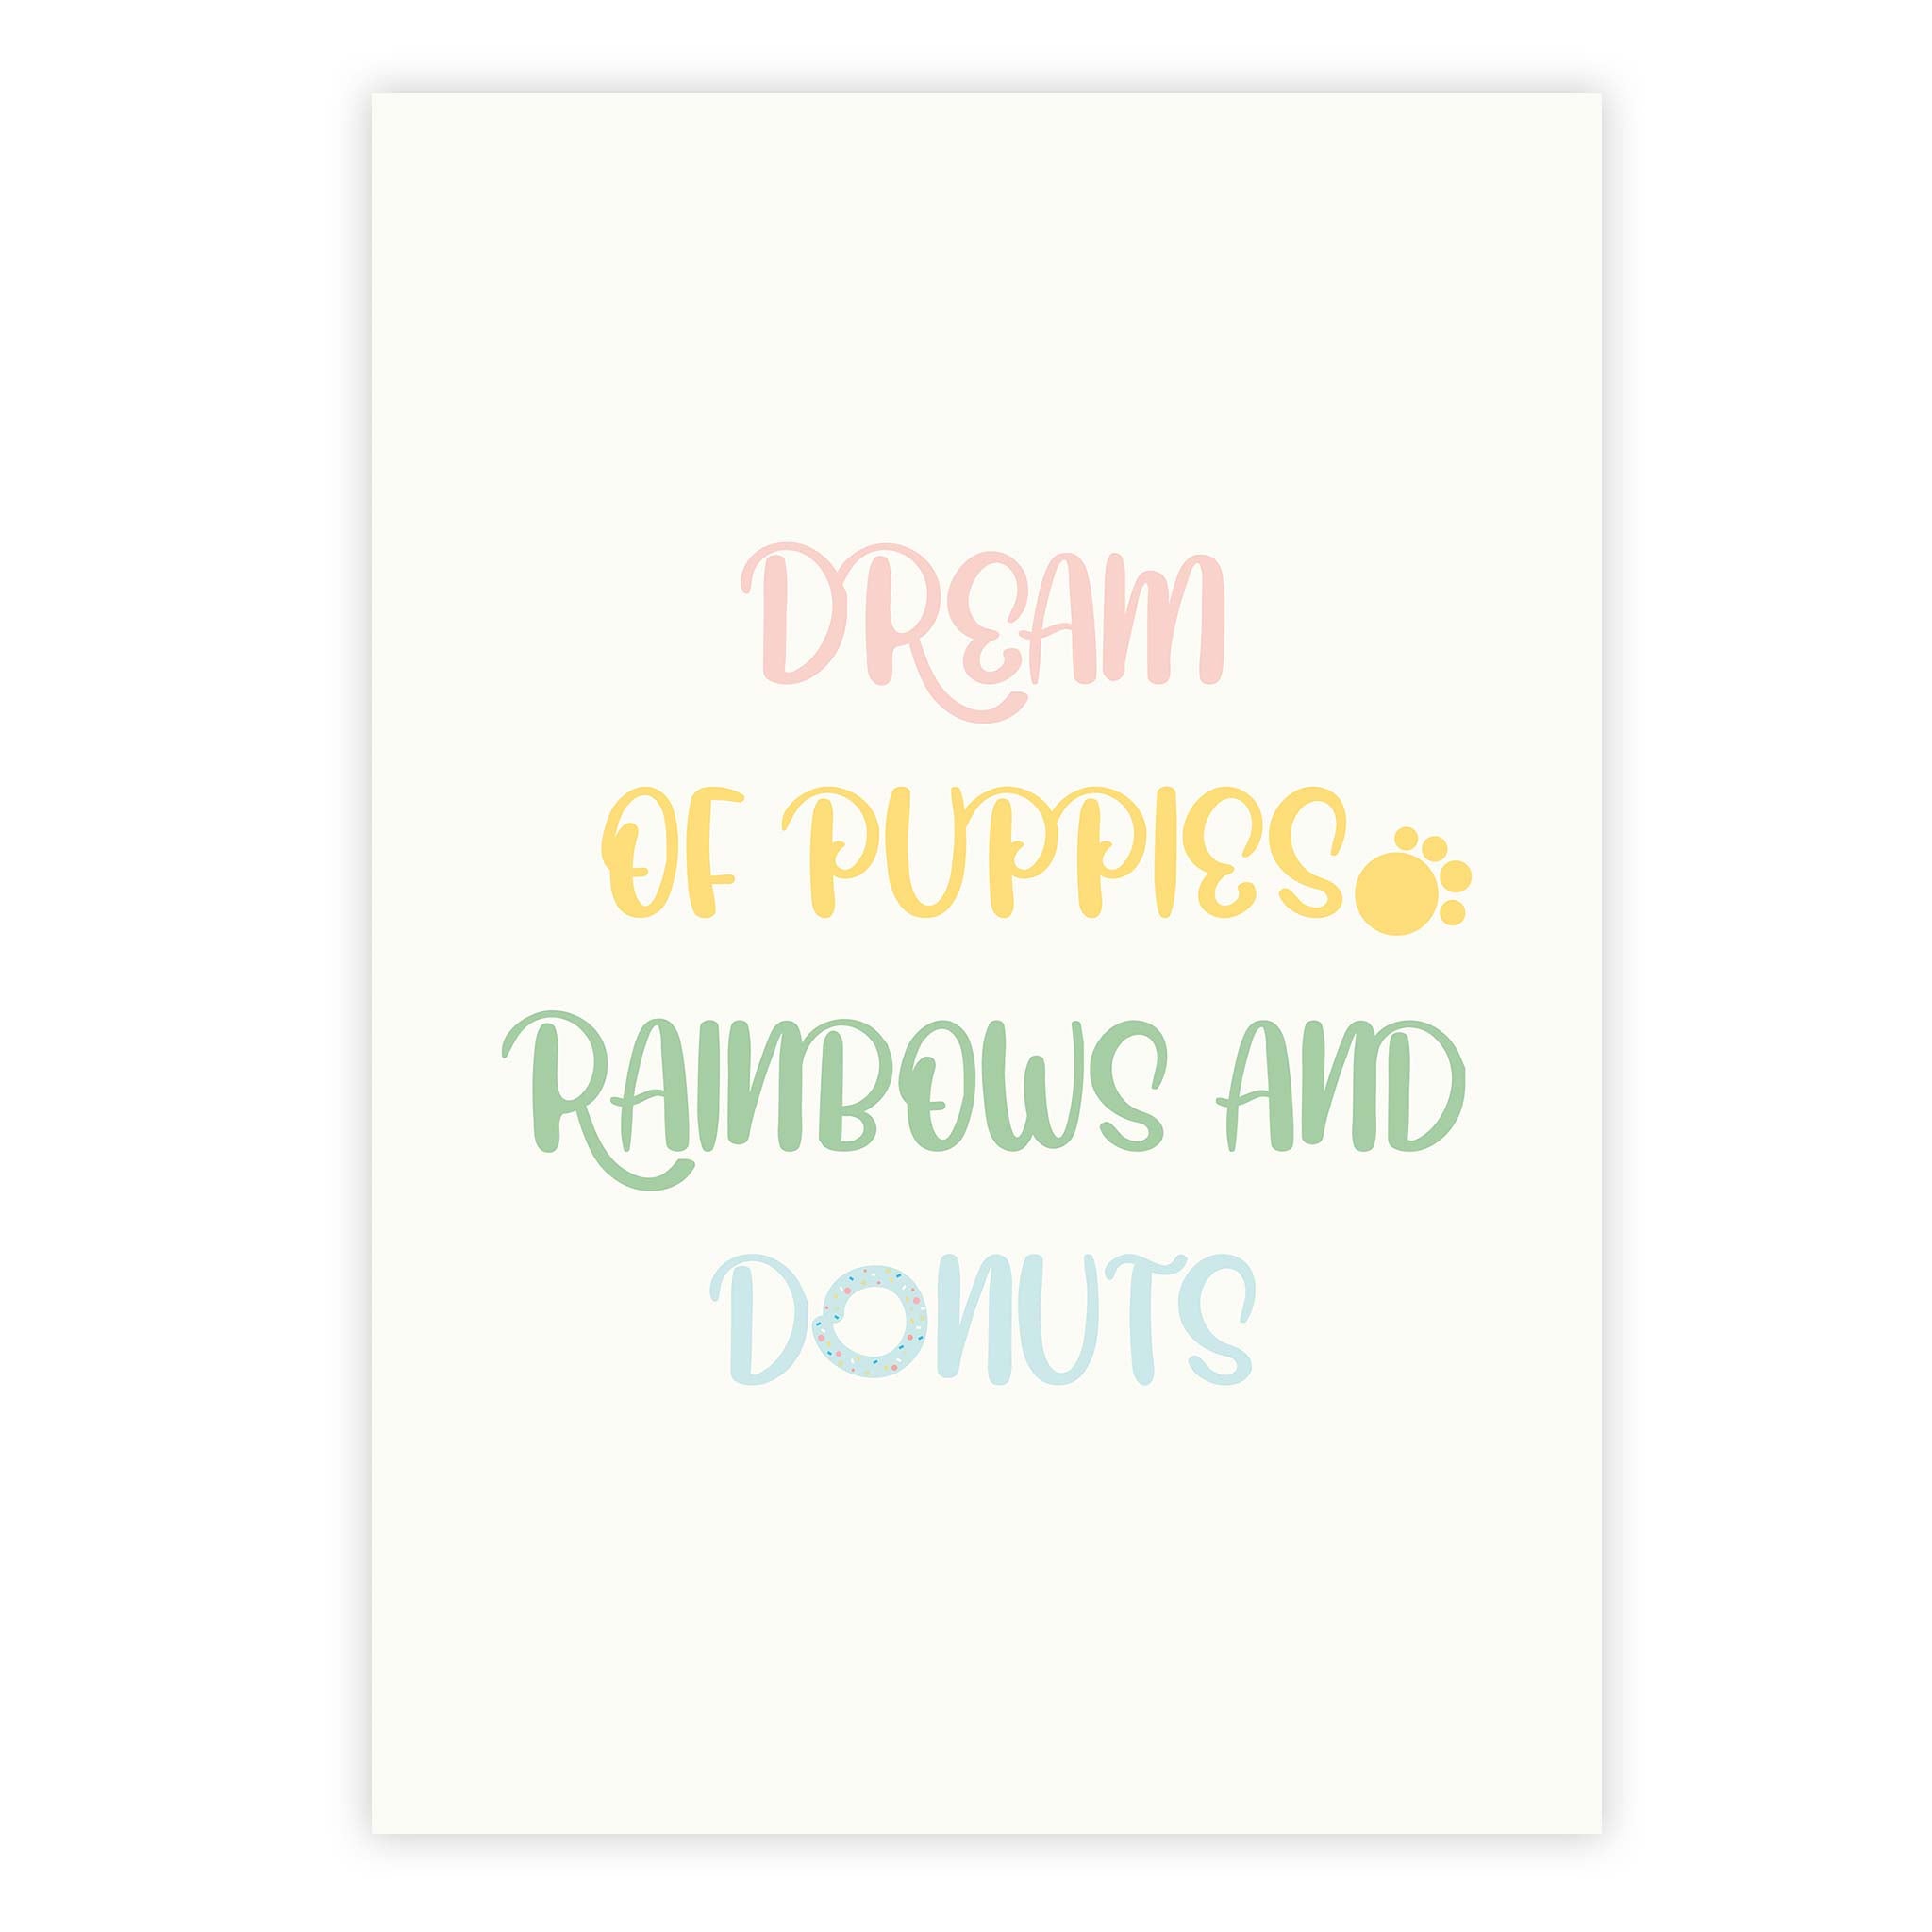 Dream of puppies, rainbows and dougnuts